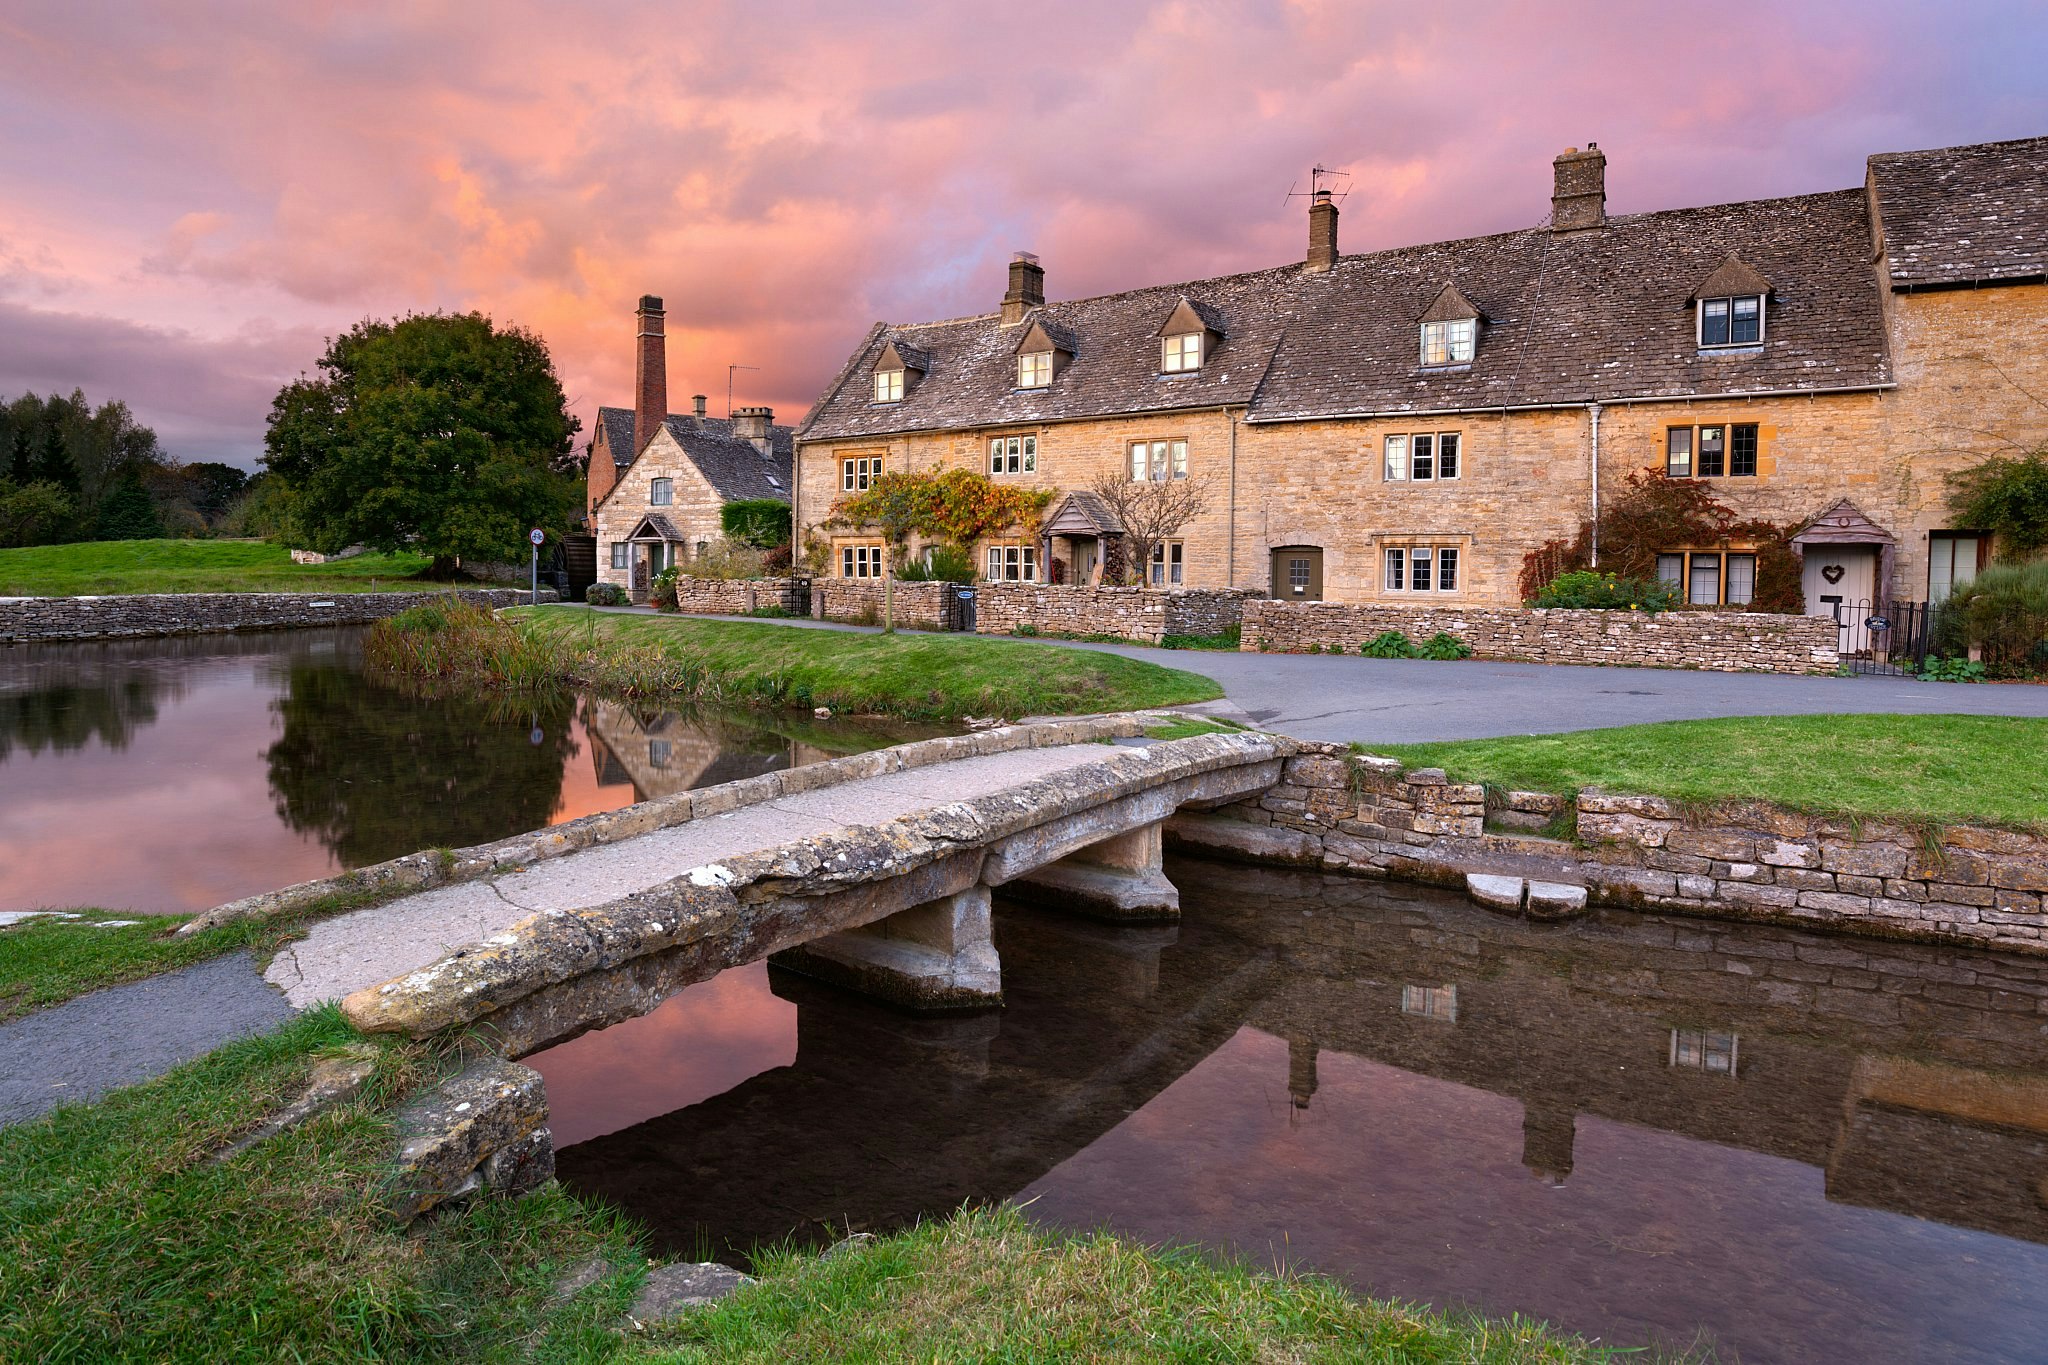 A row of stone houses behind a river in the village of Lower Slaughter at sunset.